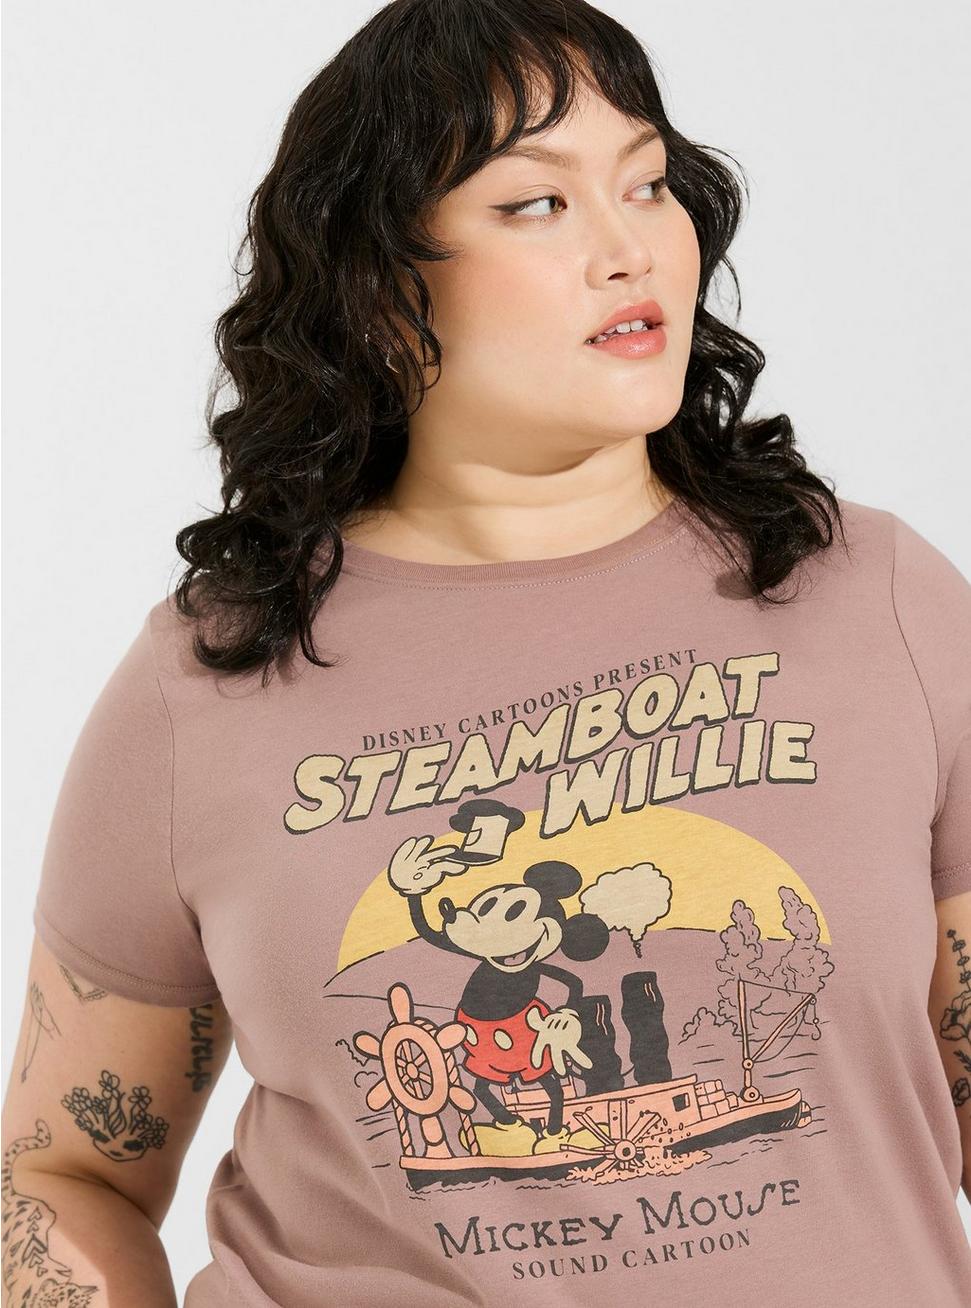 Plus Size Disney Steamboat Willie Classic Fit Crew Neck Top, BROWN, hi-res